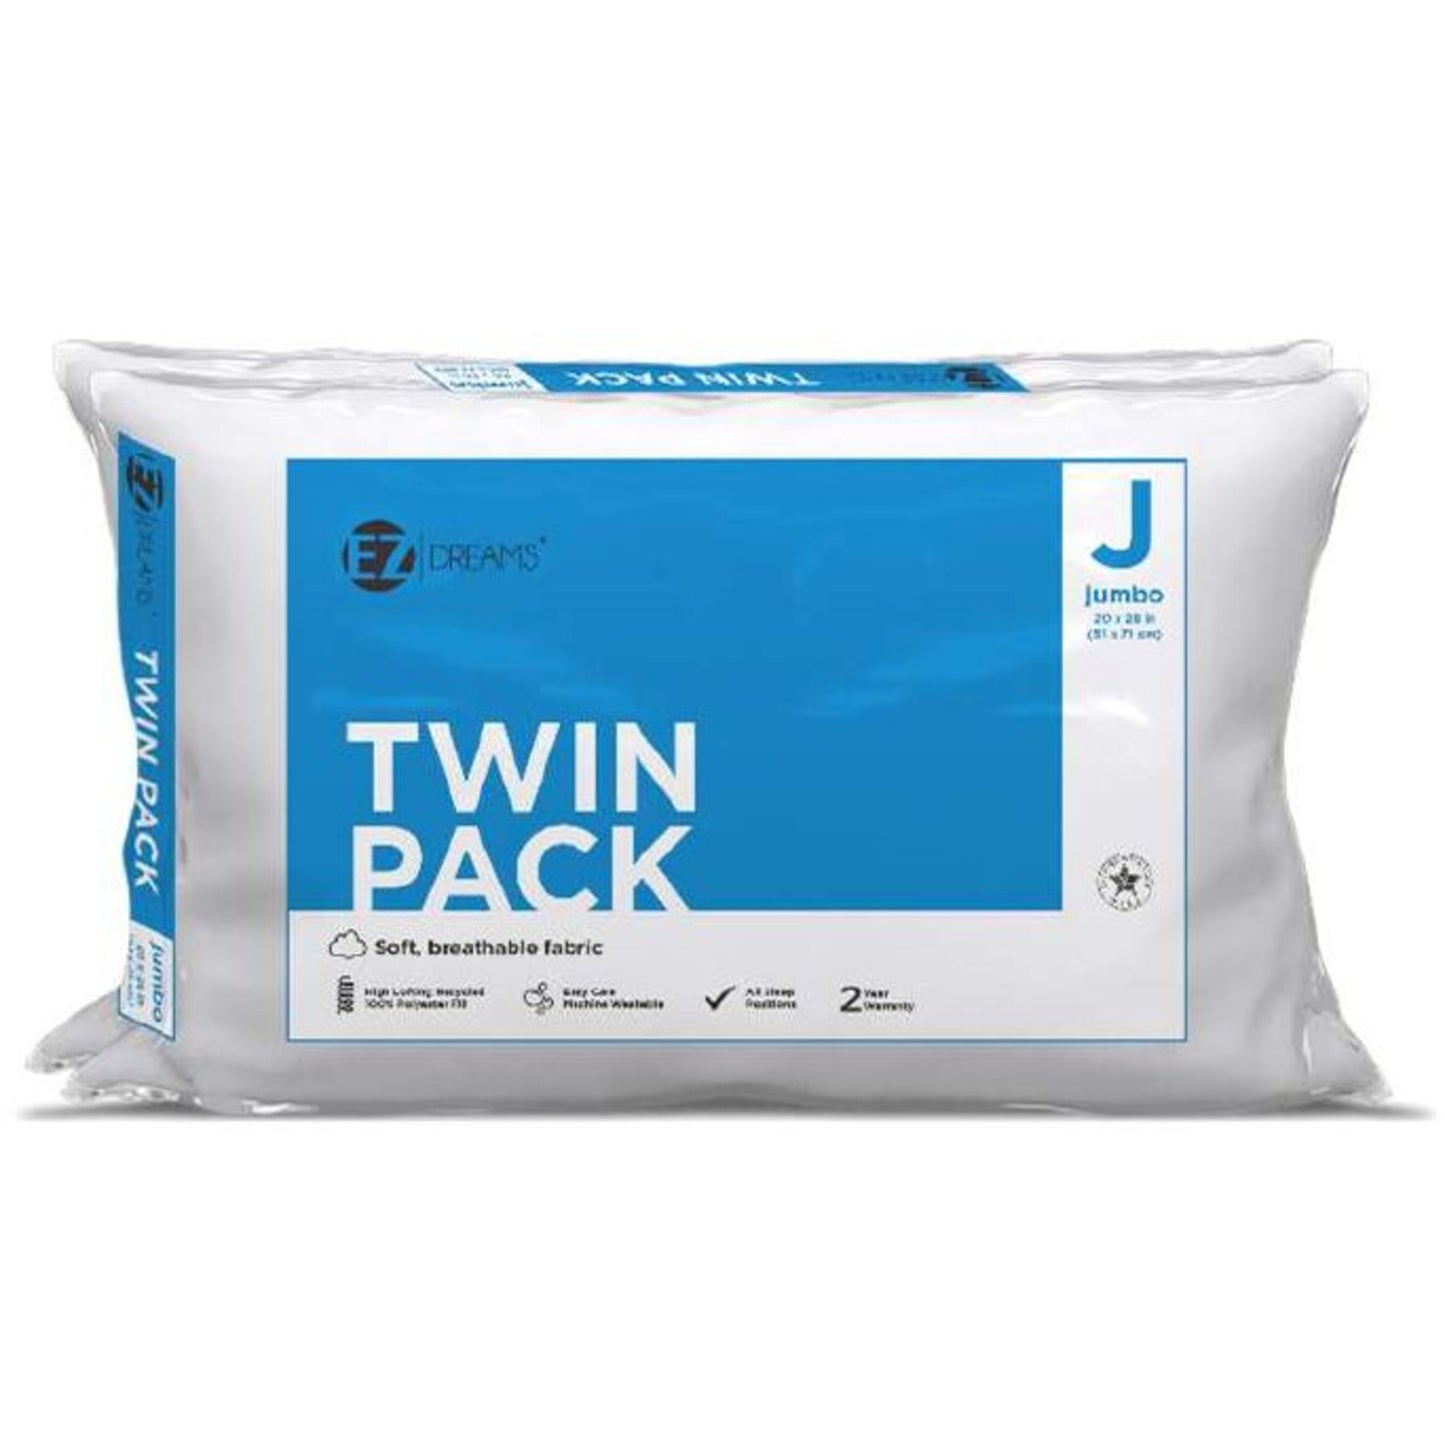 2 PACK COMPRESSED PILLOWS